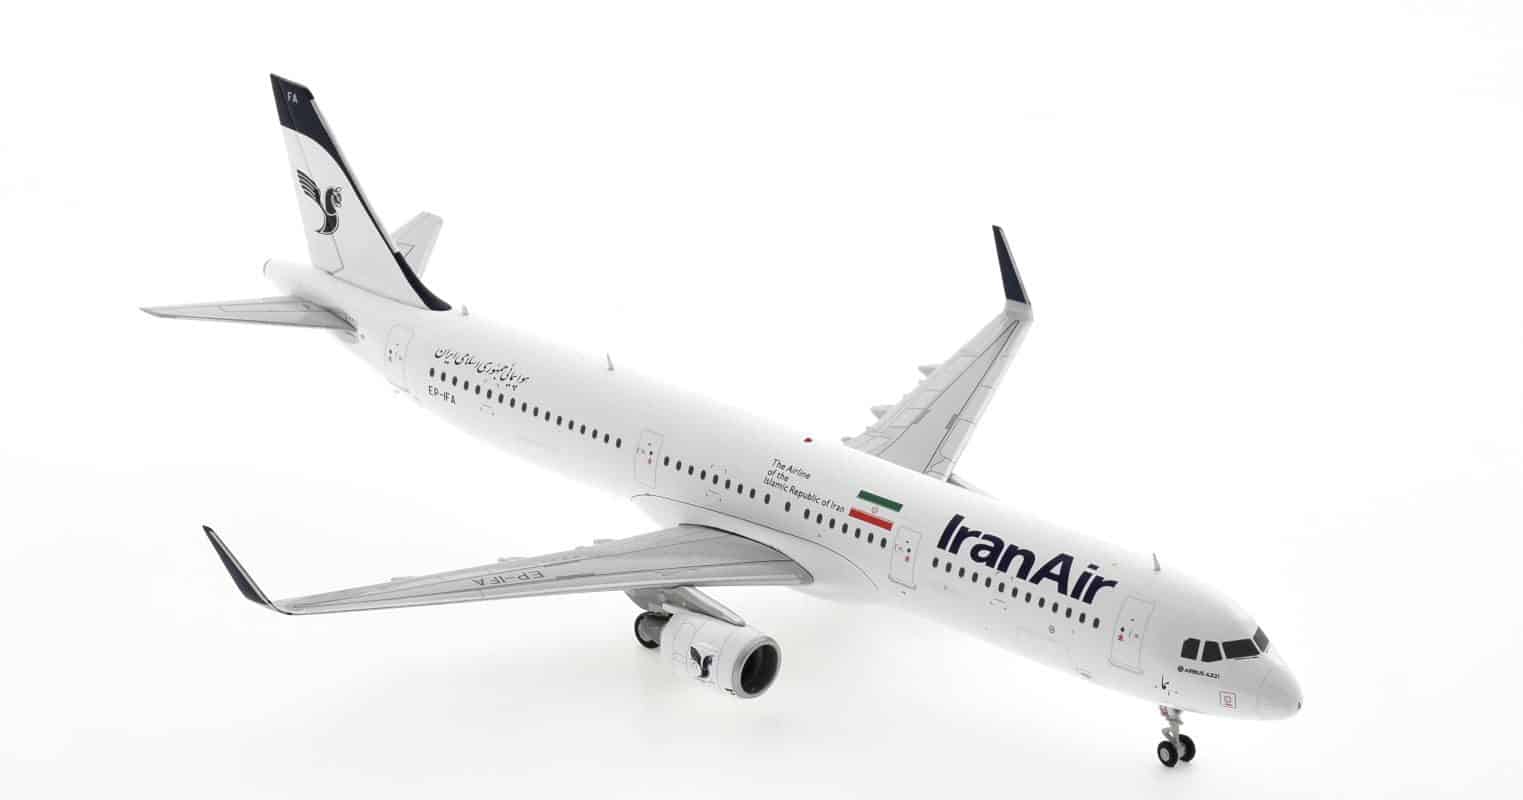 Front starboard side view of LH2IRA246 / LH2246 - 1/200 scale diecast model Airbus A321-200, registration EP-IFA in Iran Air livery.